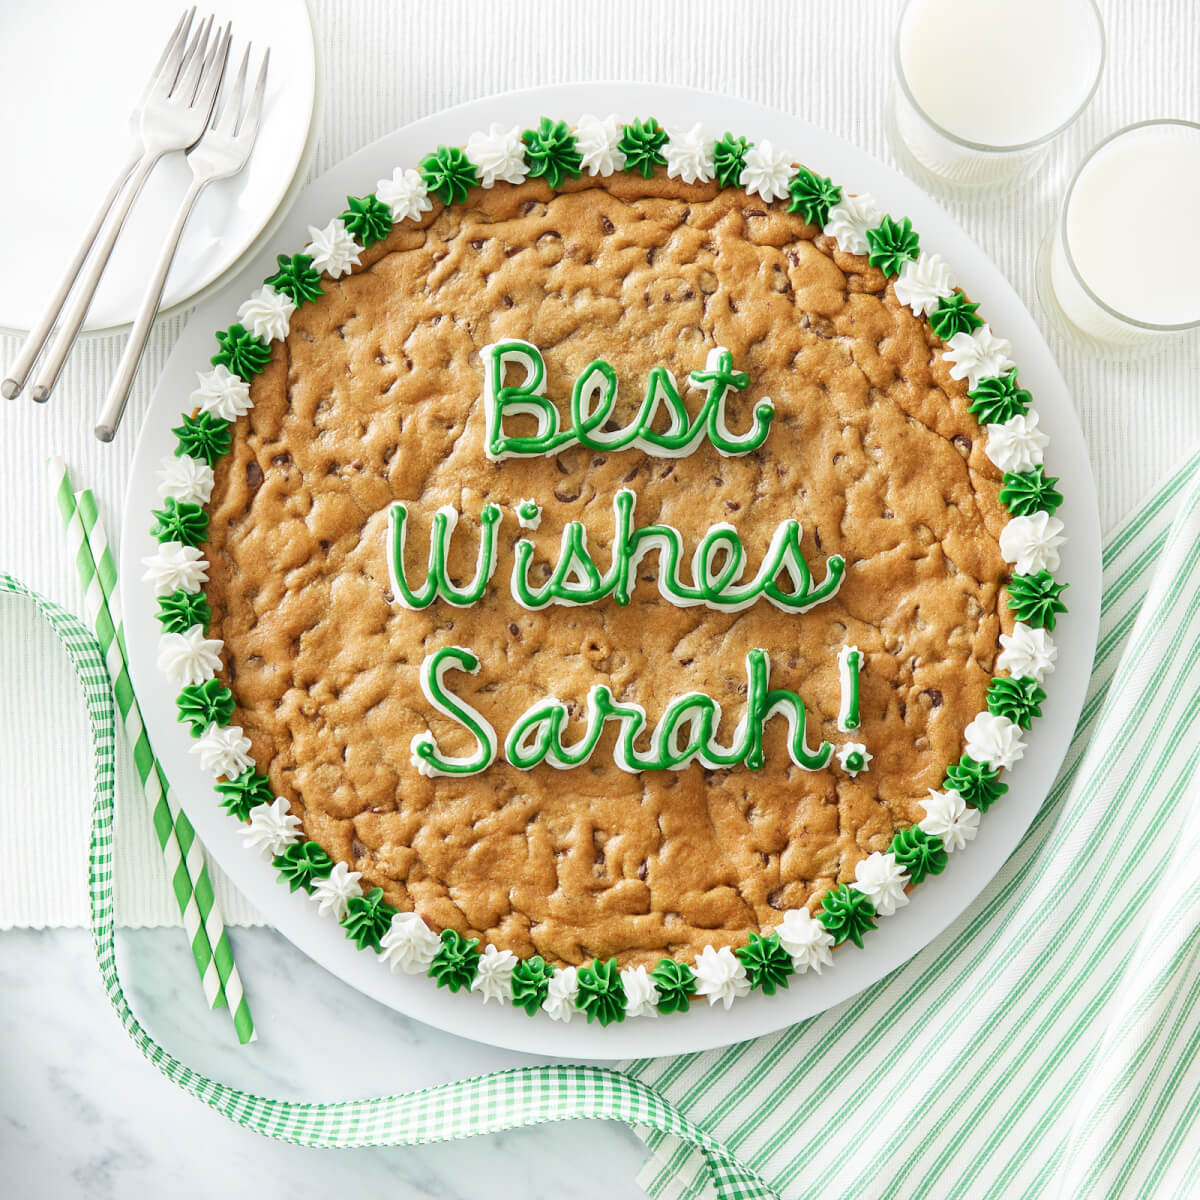 Cookie cake with "Best Wishes Sarah!" written in green and white frosting